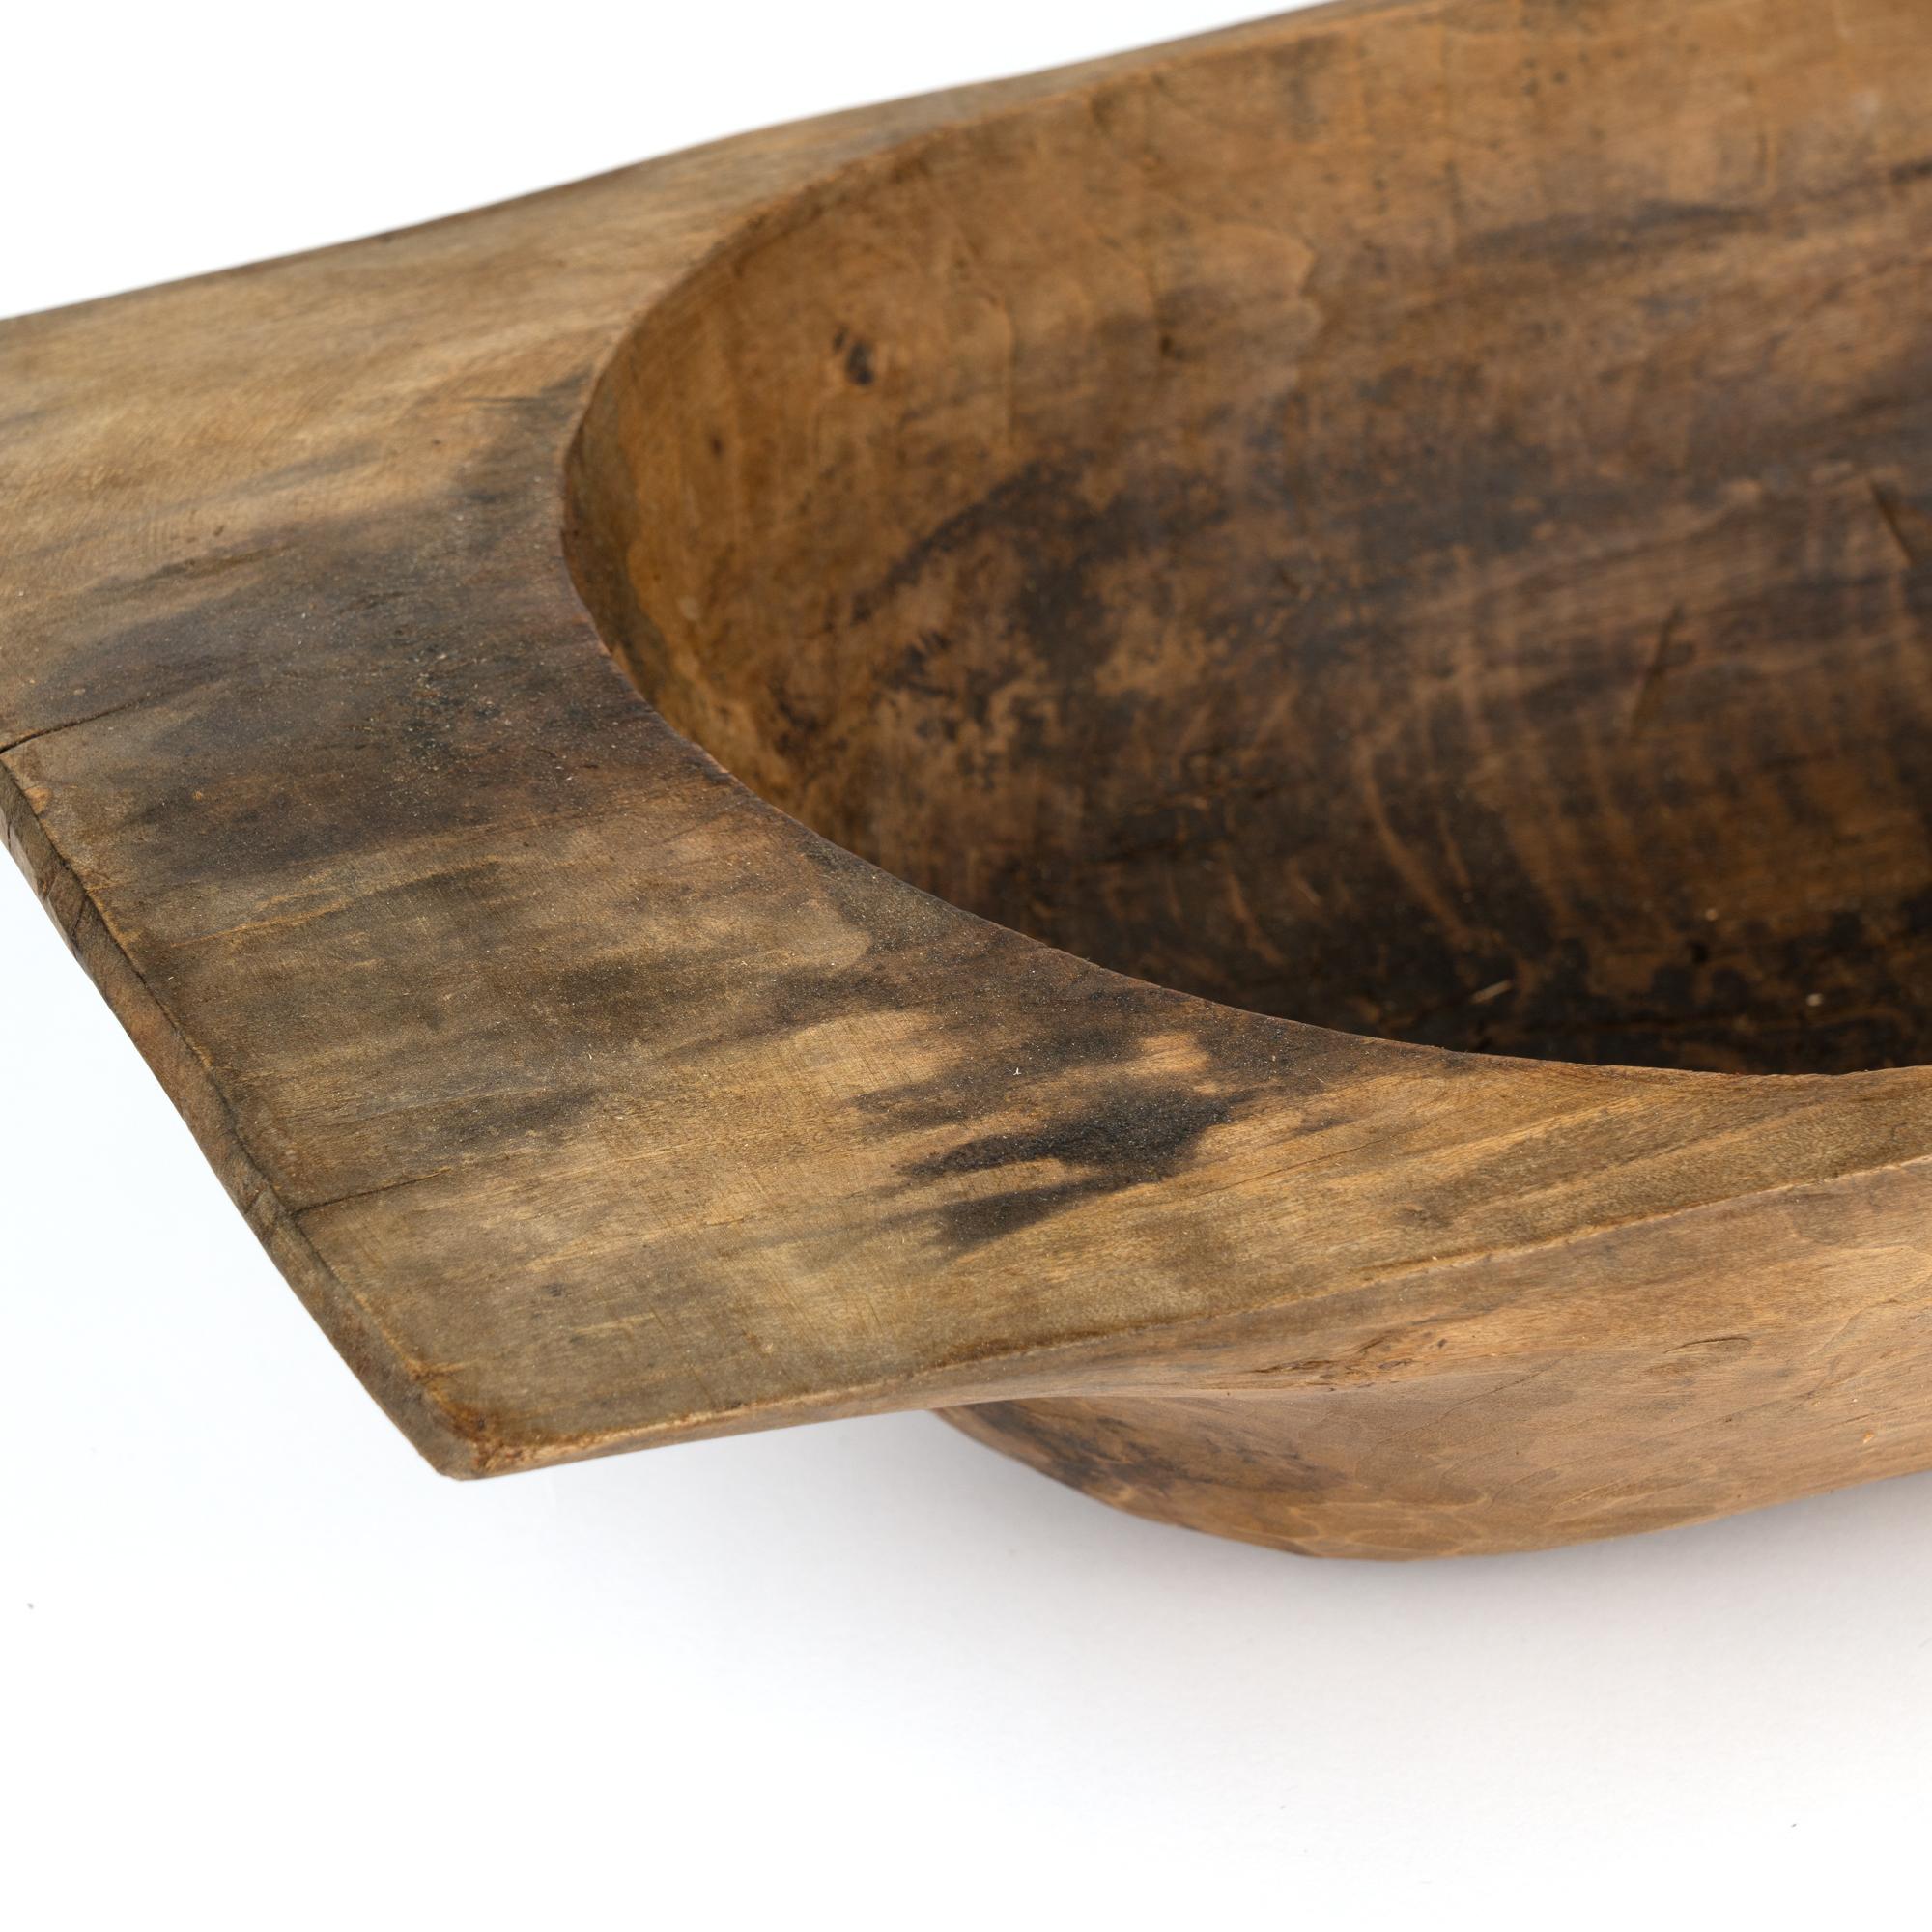 Antique Hand Hewn Wooden Dough Bowl, Hungary circa 1890 In Good Condition For Sale In Round Top, TX